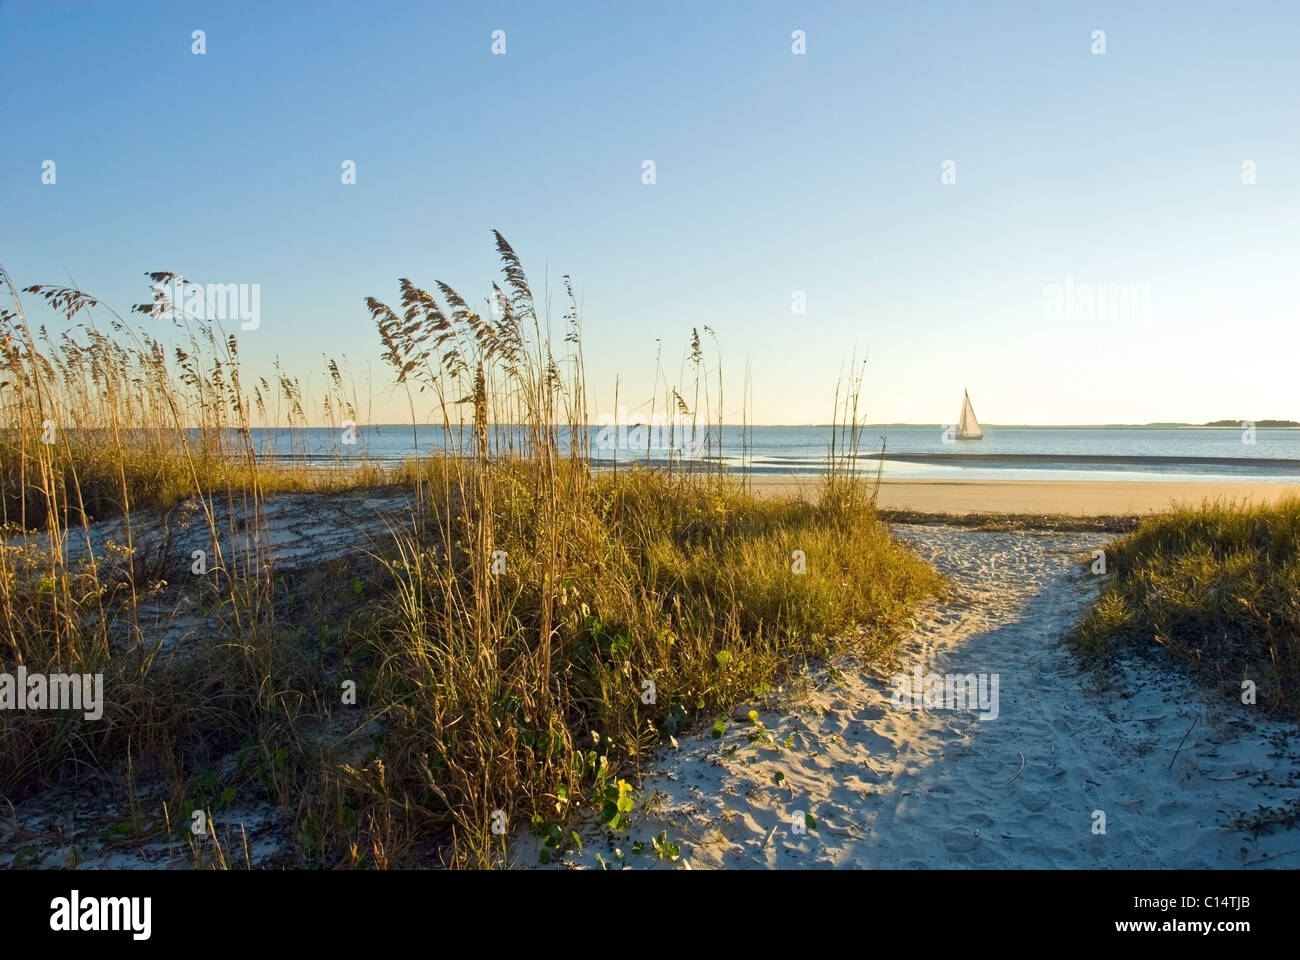 A sand pathway leads to the beach with a sailboat in the background on Hilton Head Island, SC. Stock Photo